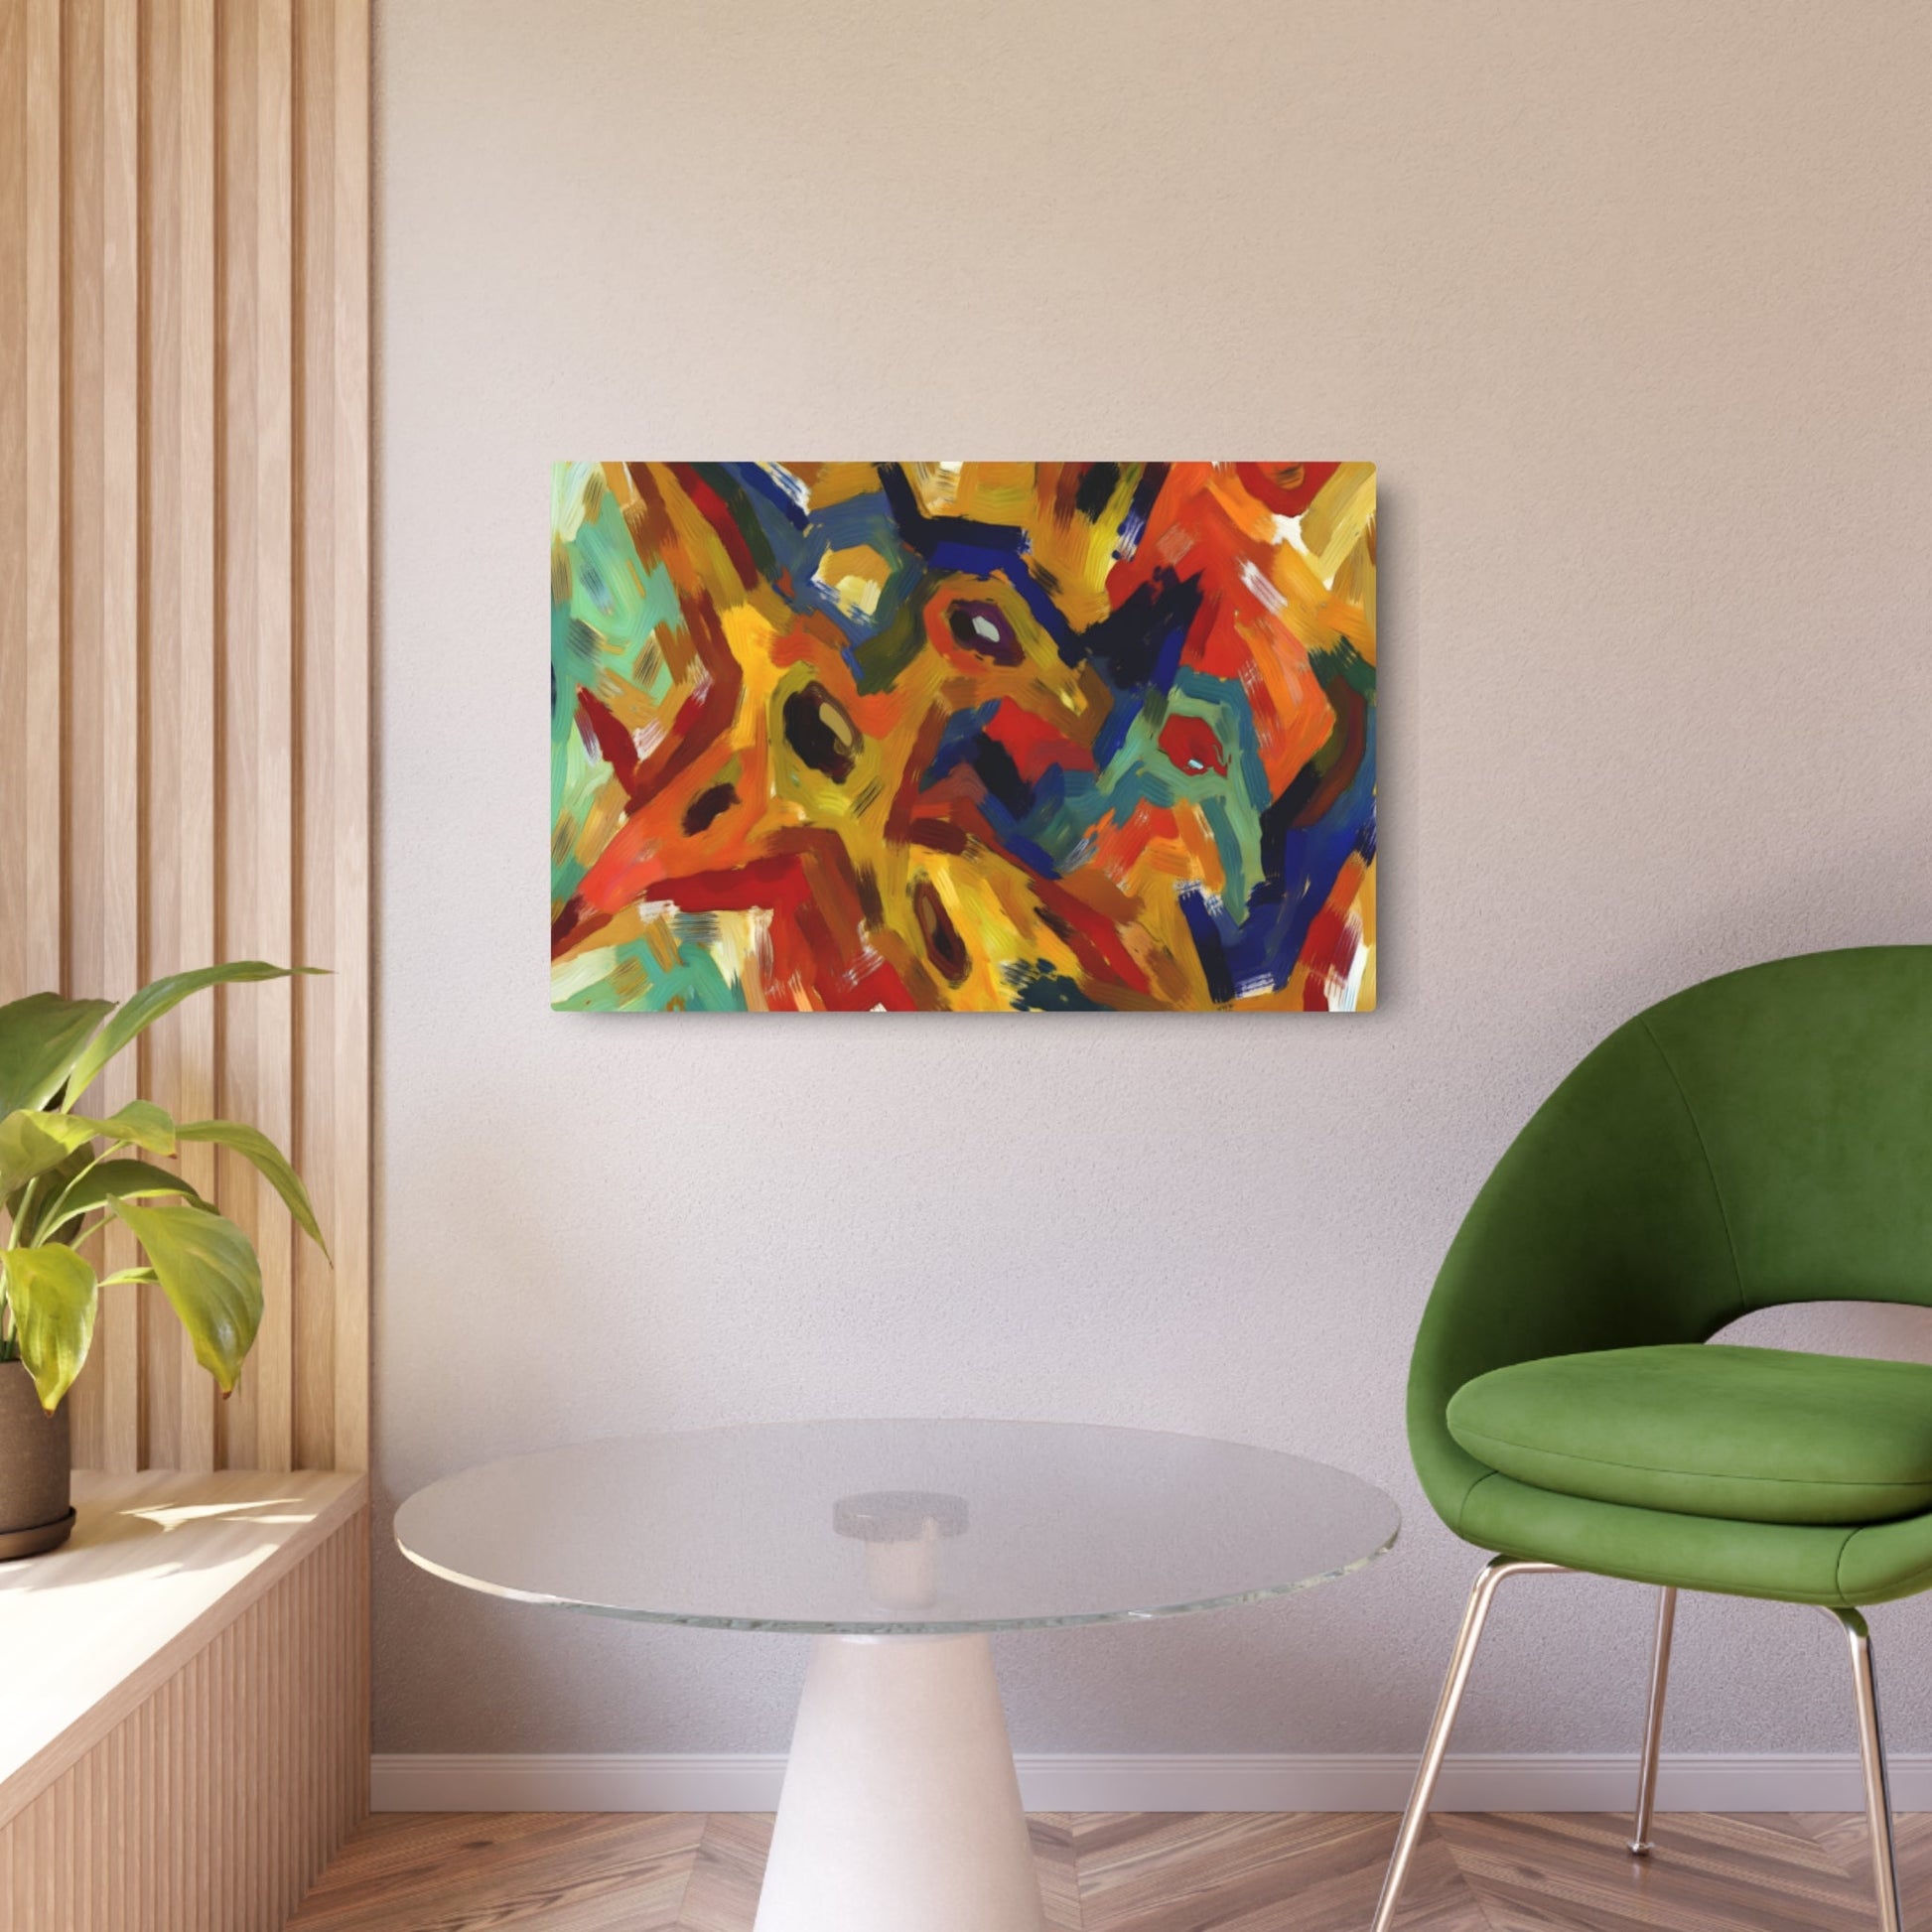 Metal Poster Art | "Vibrant Expressionist Style Western Artwork: Bold Colors, Distorted Forms and Dramatic Brushstrokes with High Emotional Impact" - Metal Poster Art 36″ x 24″ (Horizontal) 0.12''